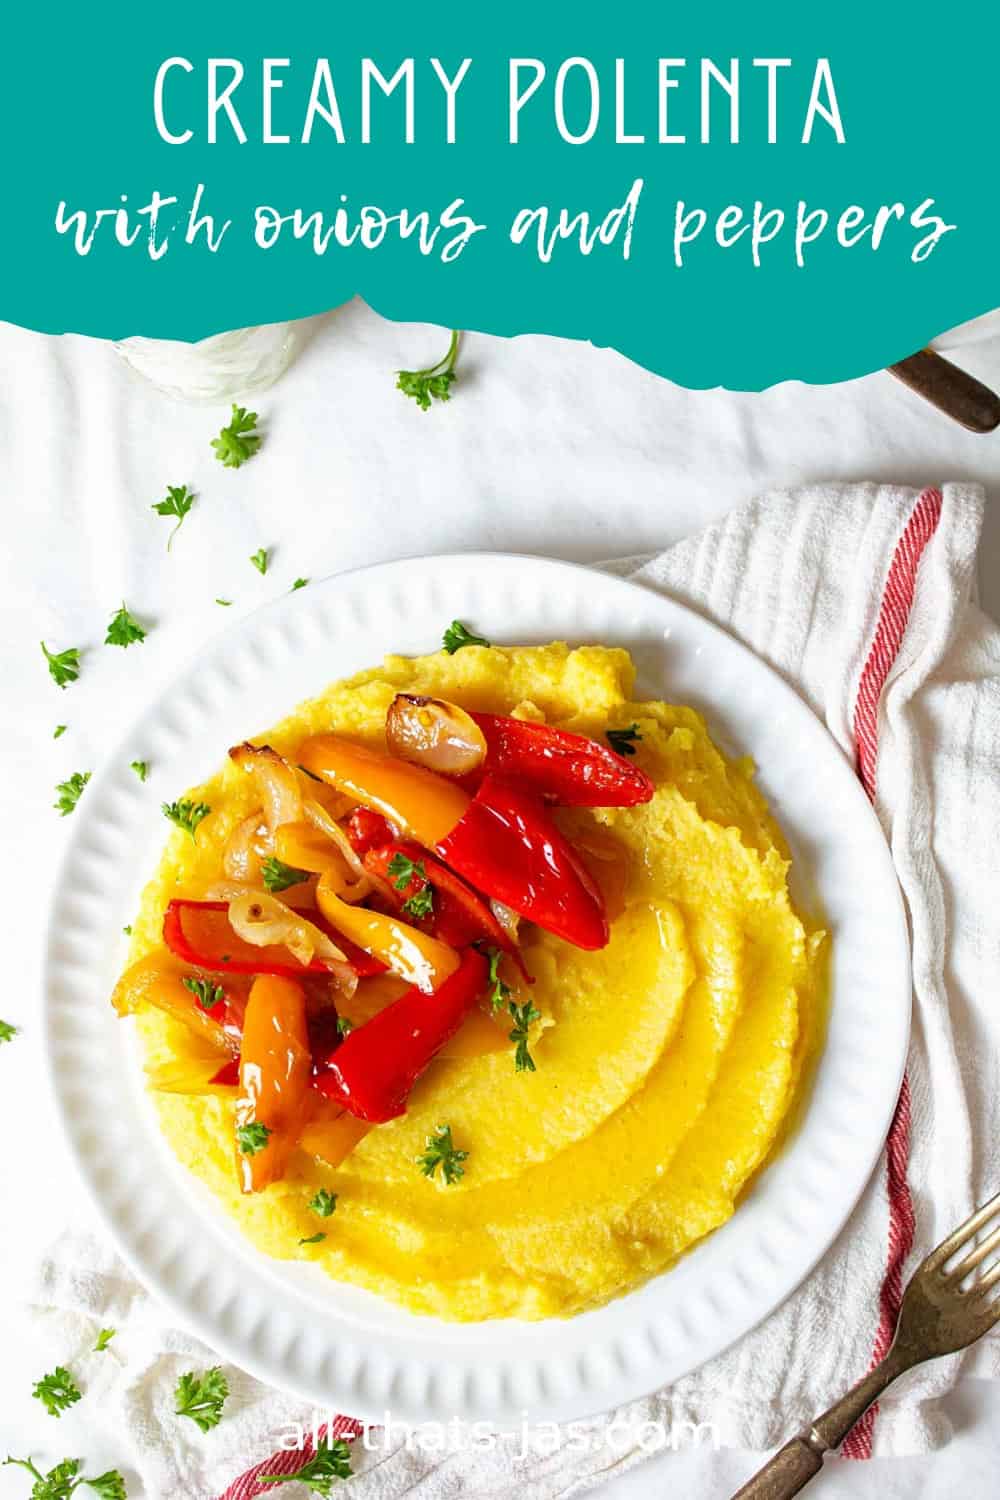 Pura - Bosnian polenta with onions and peppers and text overlay.